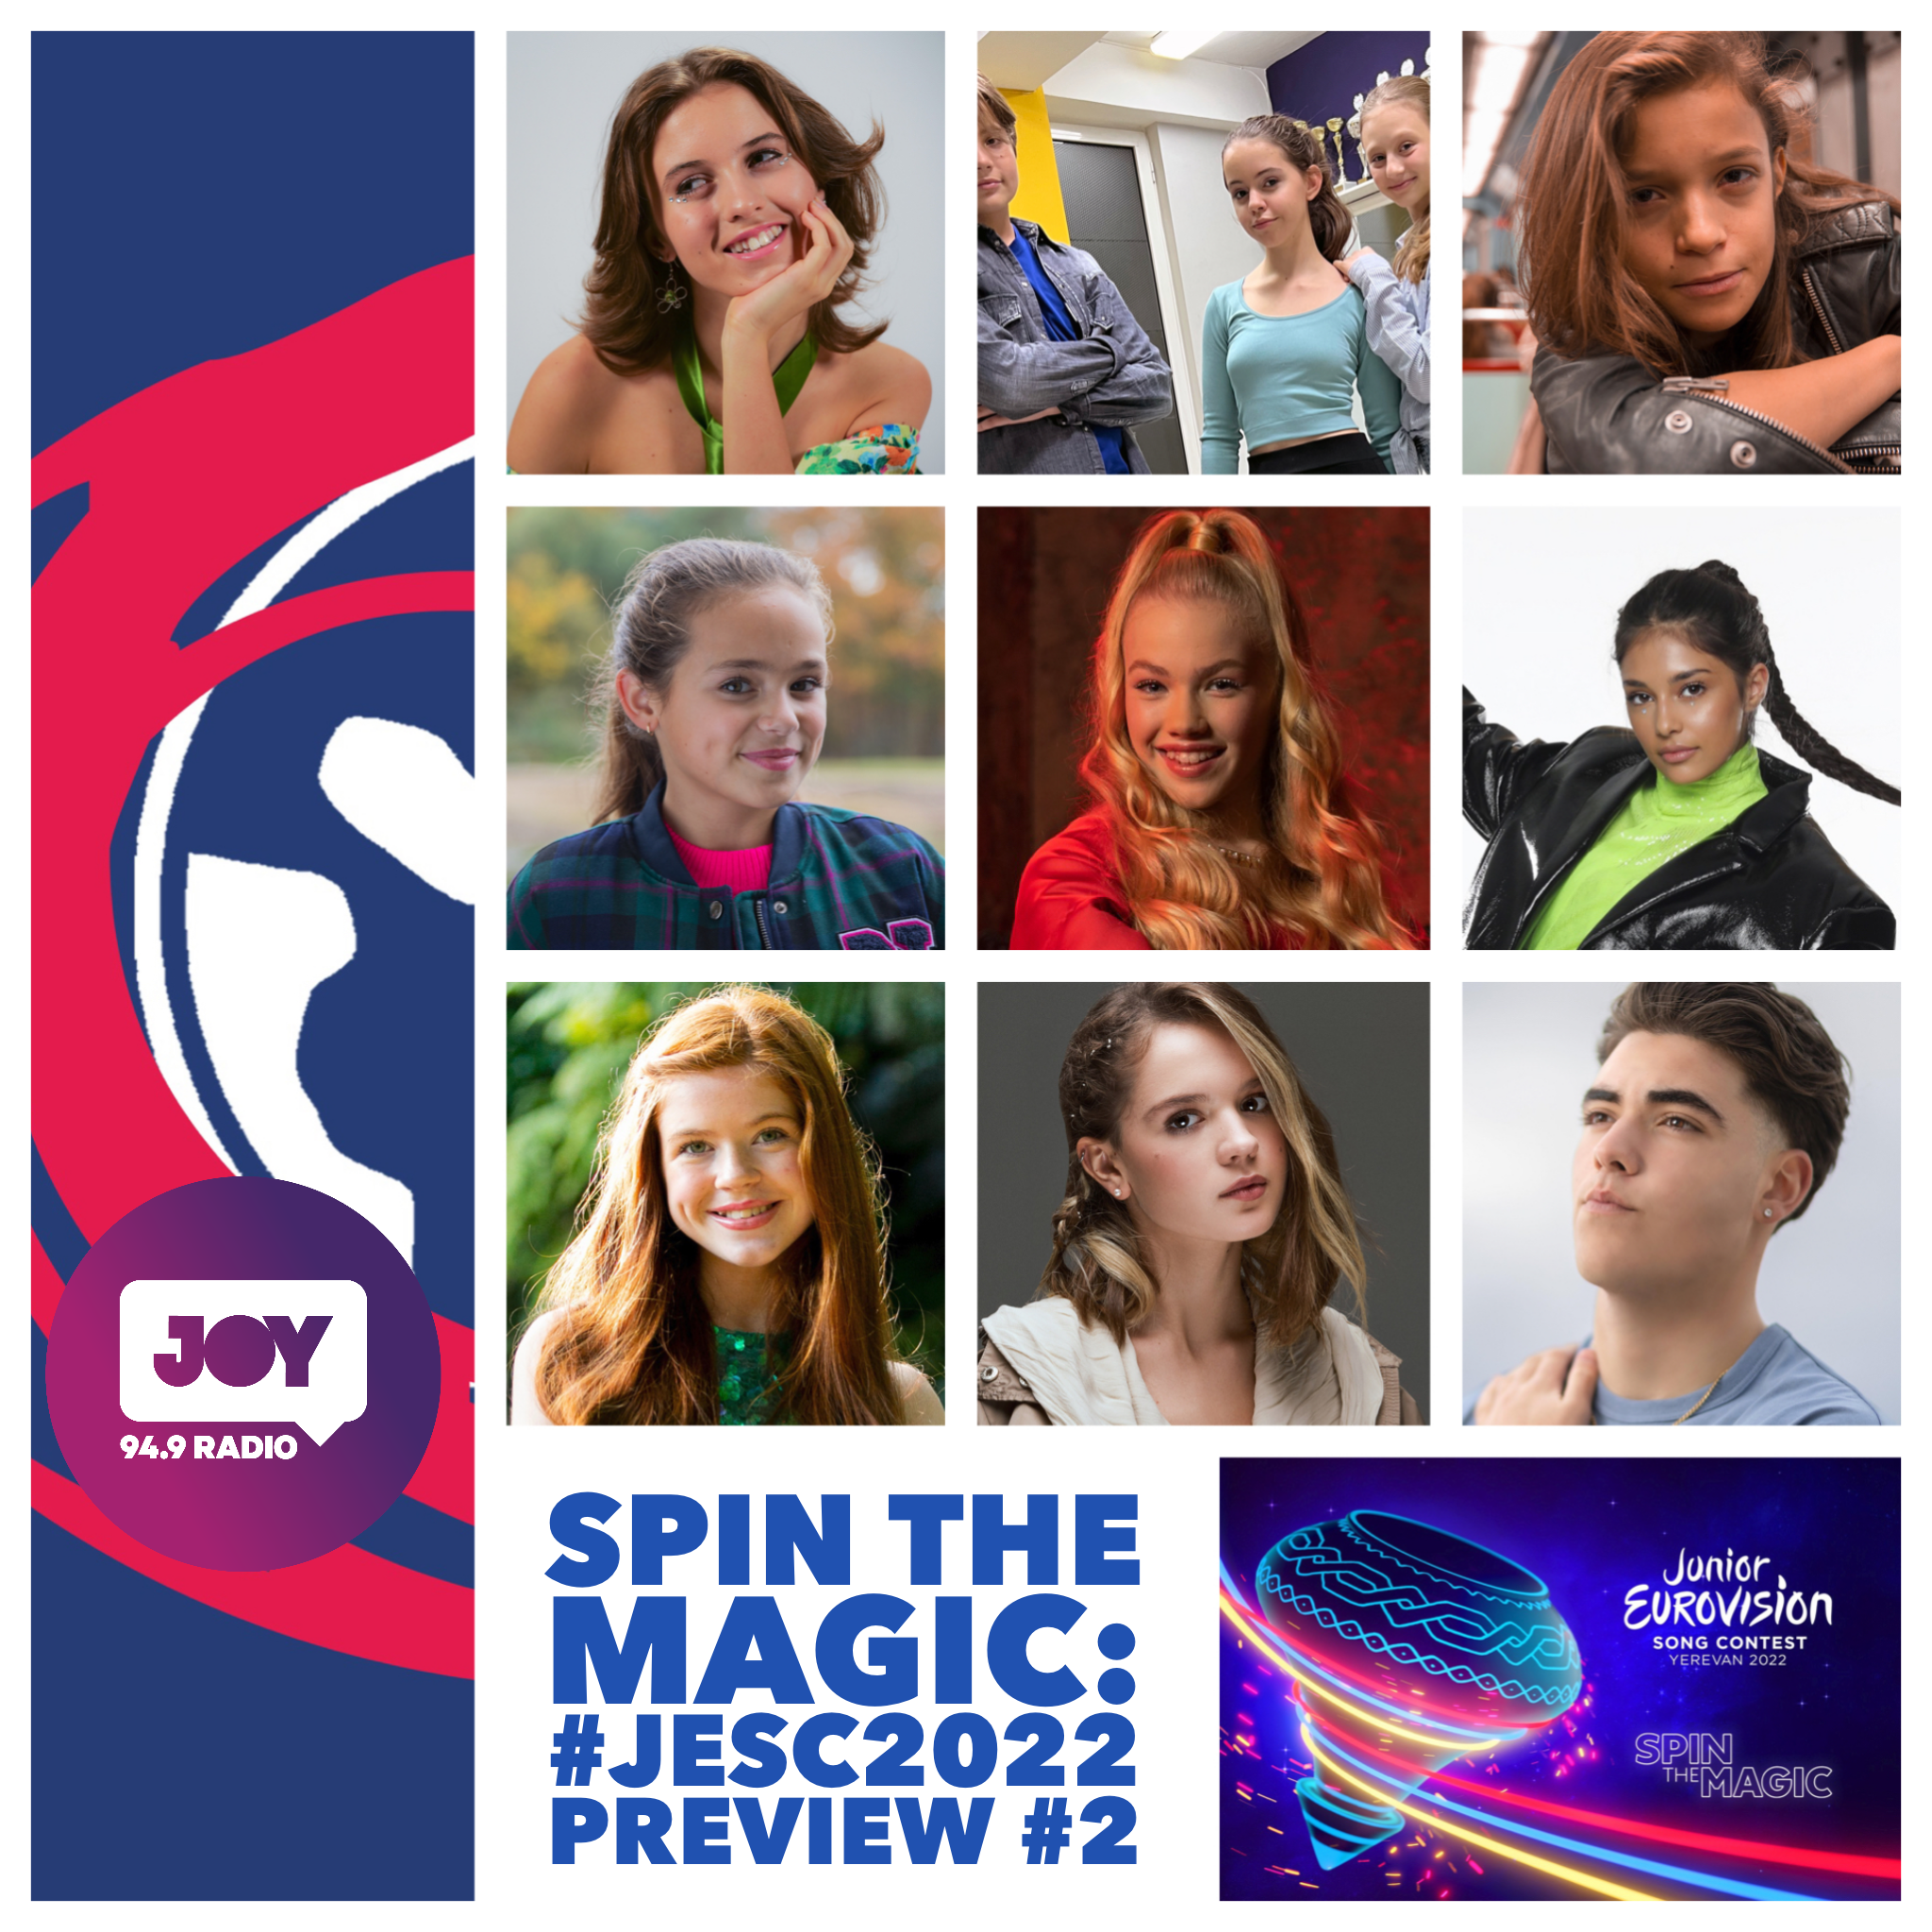 Magic the second preview of the 2022 Junior Eurovision Song Contest